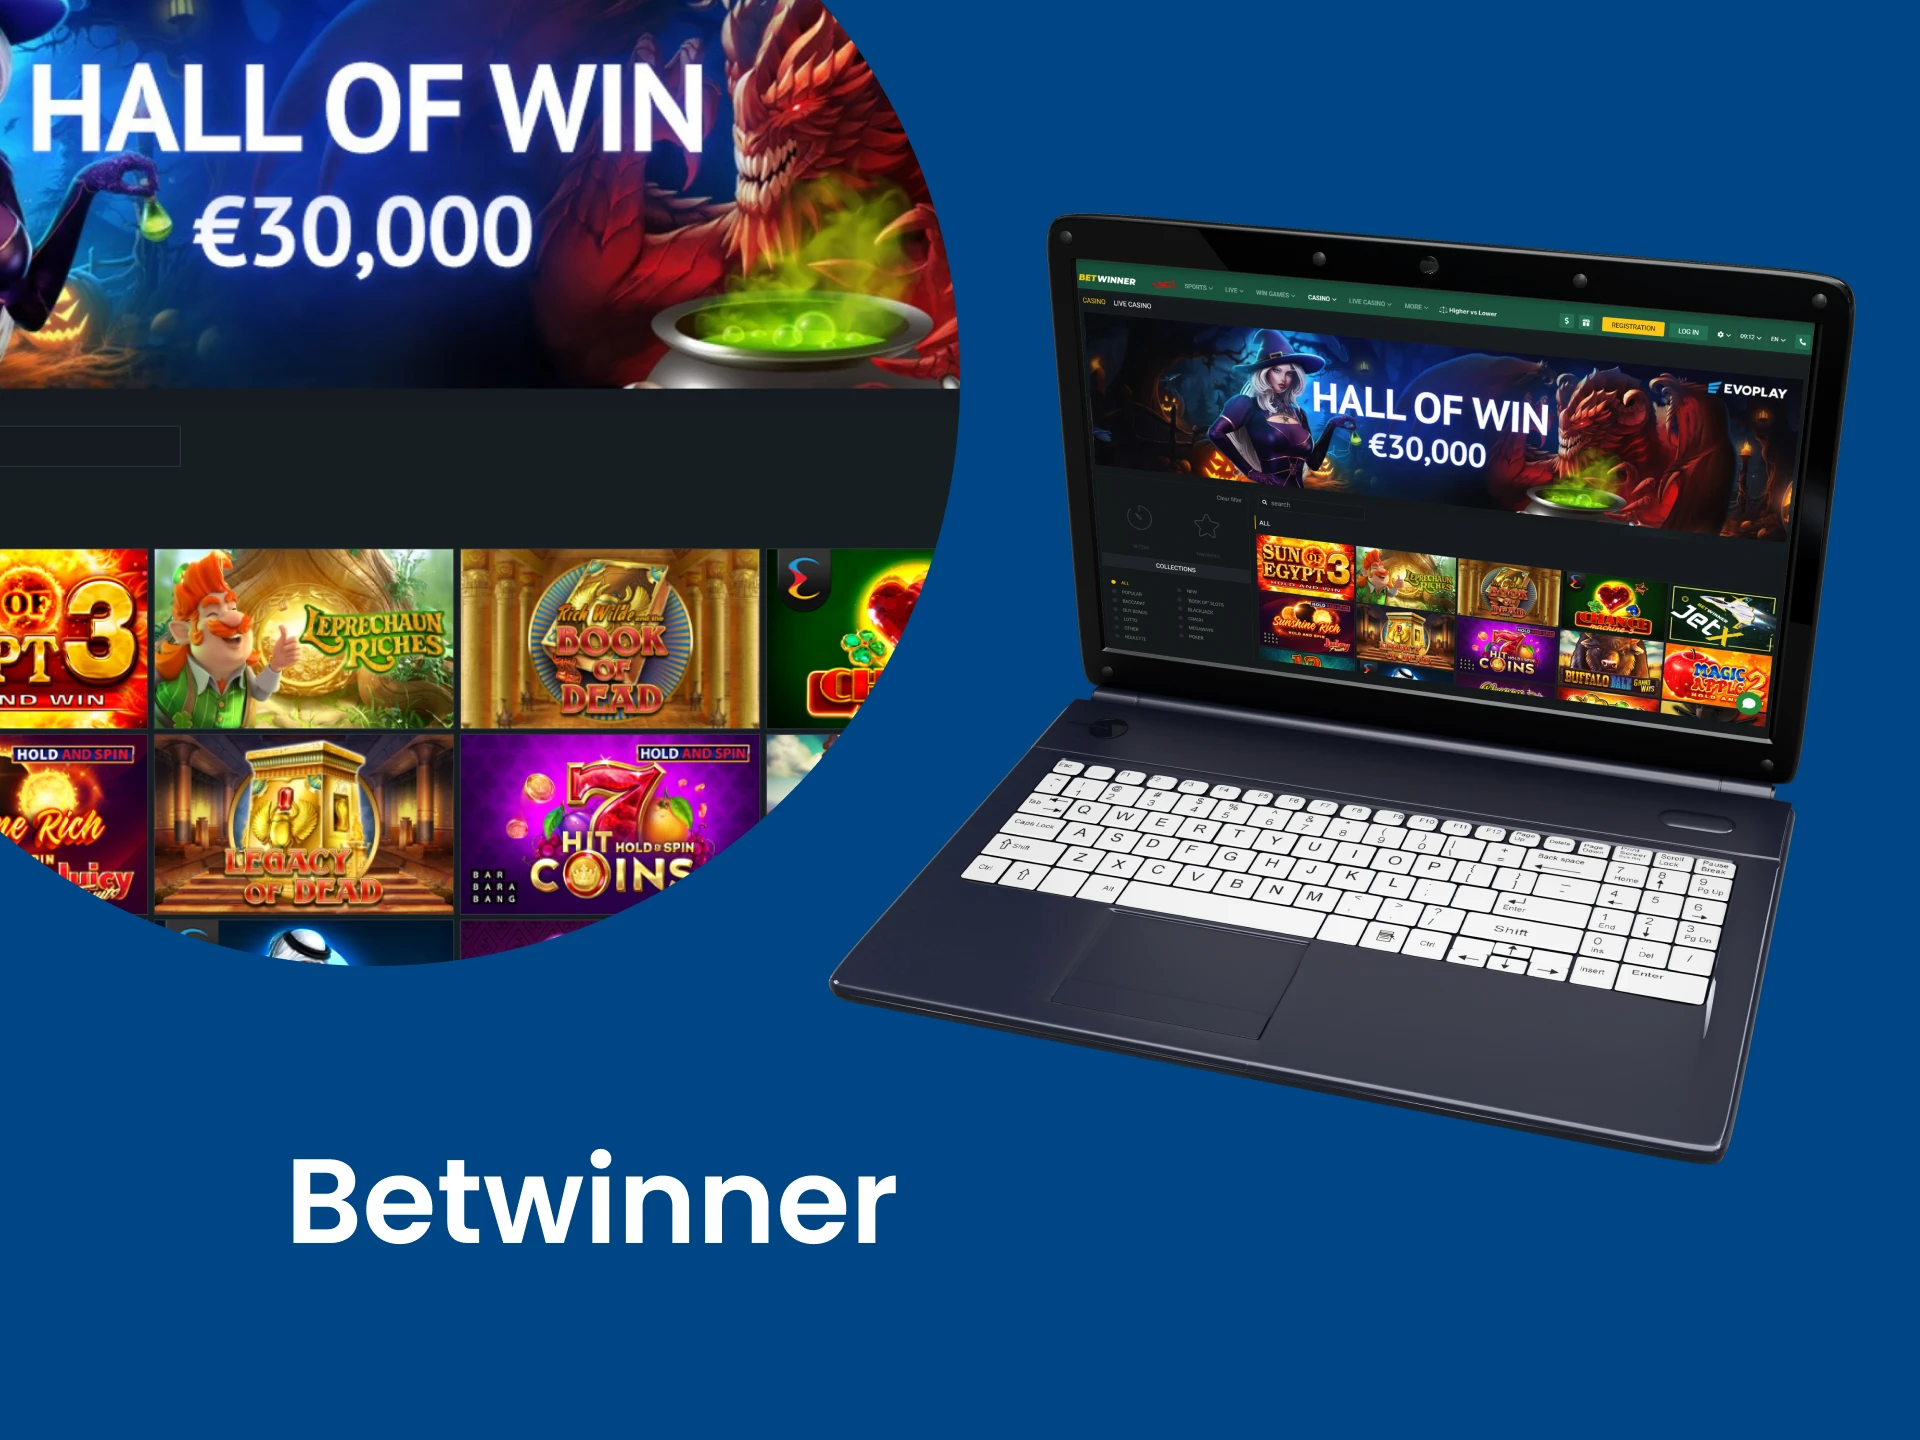 Betwinner is ideal for playing in online casinos.